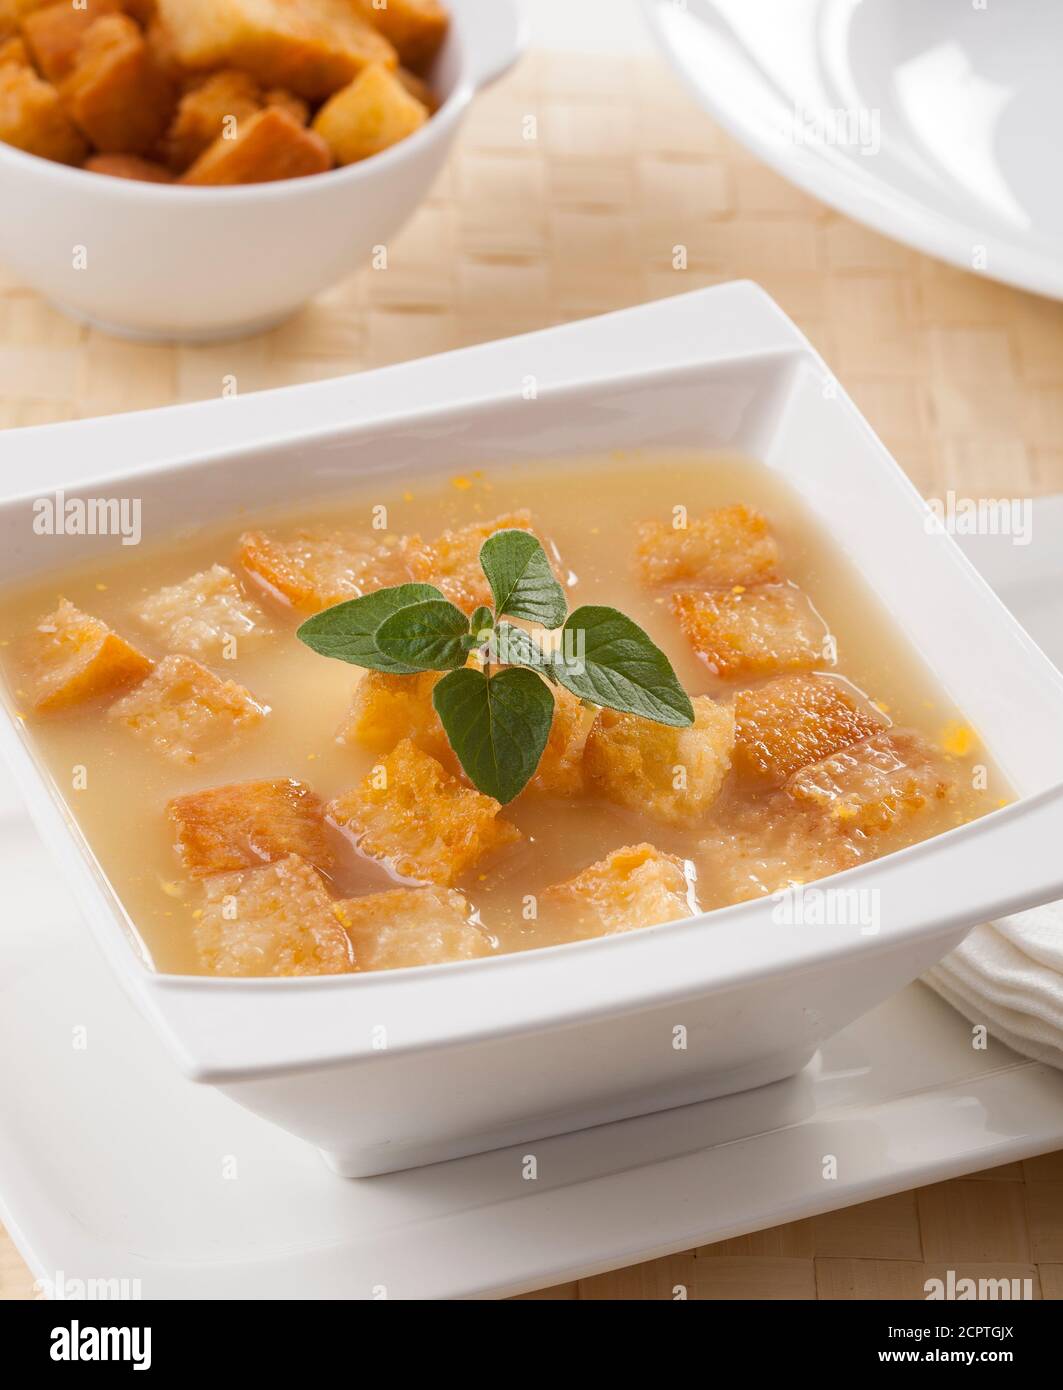 Croutons in a broth Stock Photo